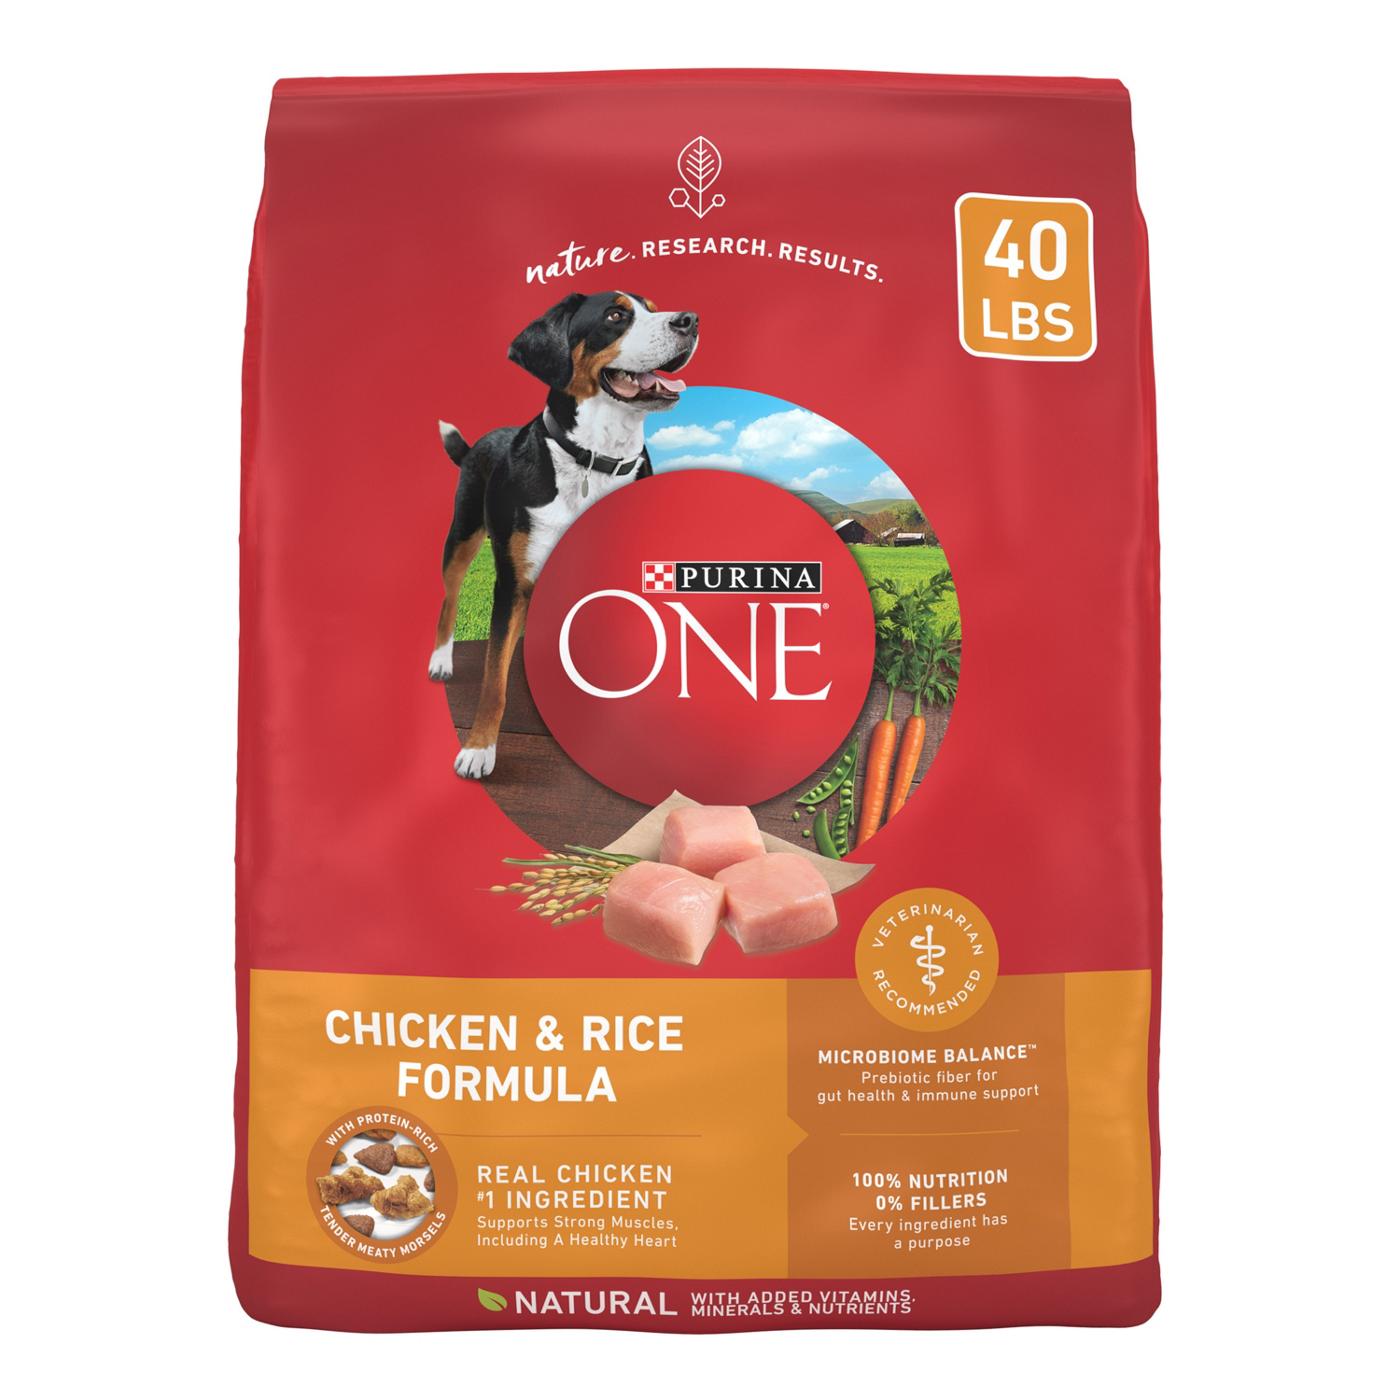 Purina ONE Purina ONE Chicken and Rice Formula Dry Dog Food; image 1 of 5